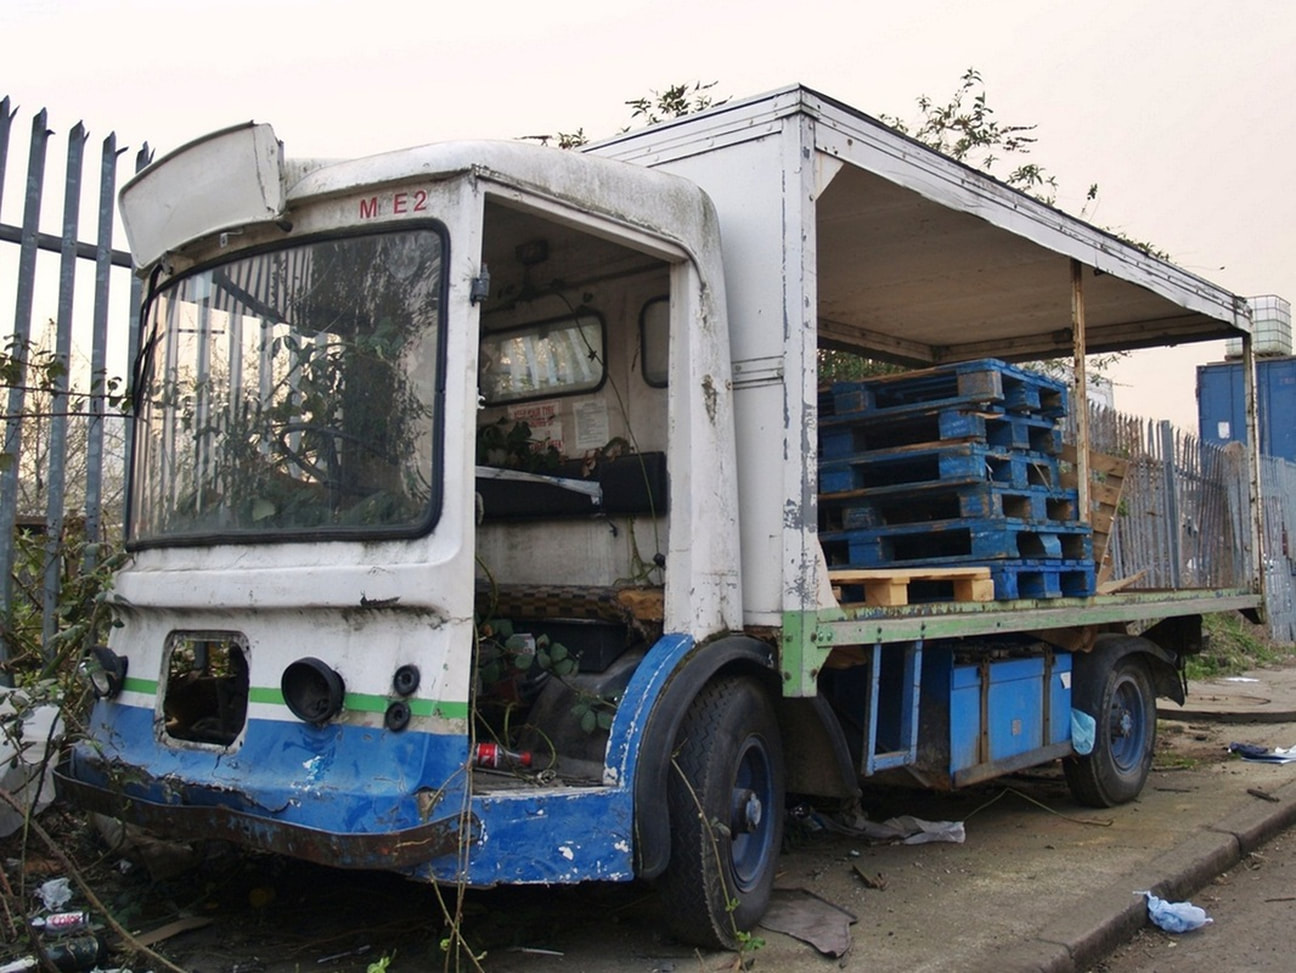 Abandoned milkfloat in Bromley By Bow